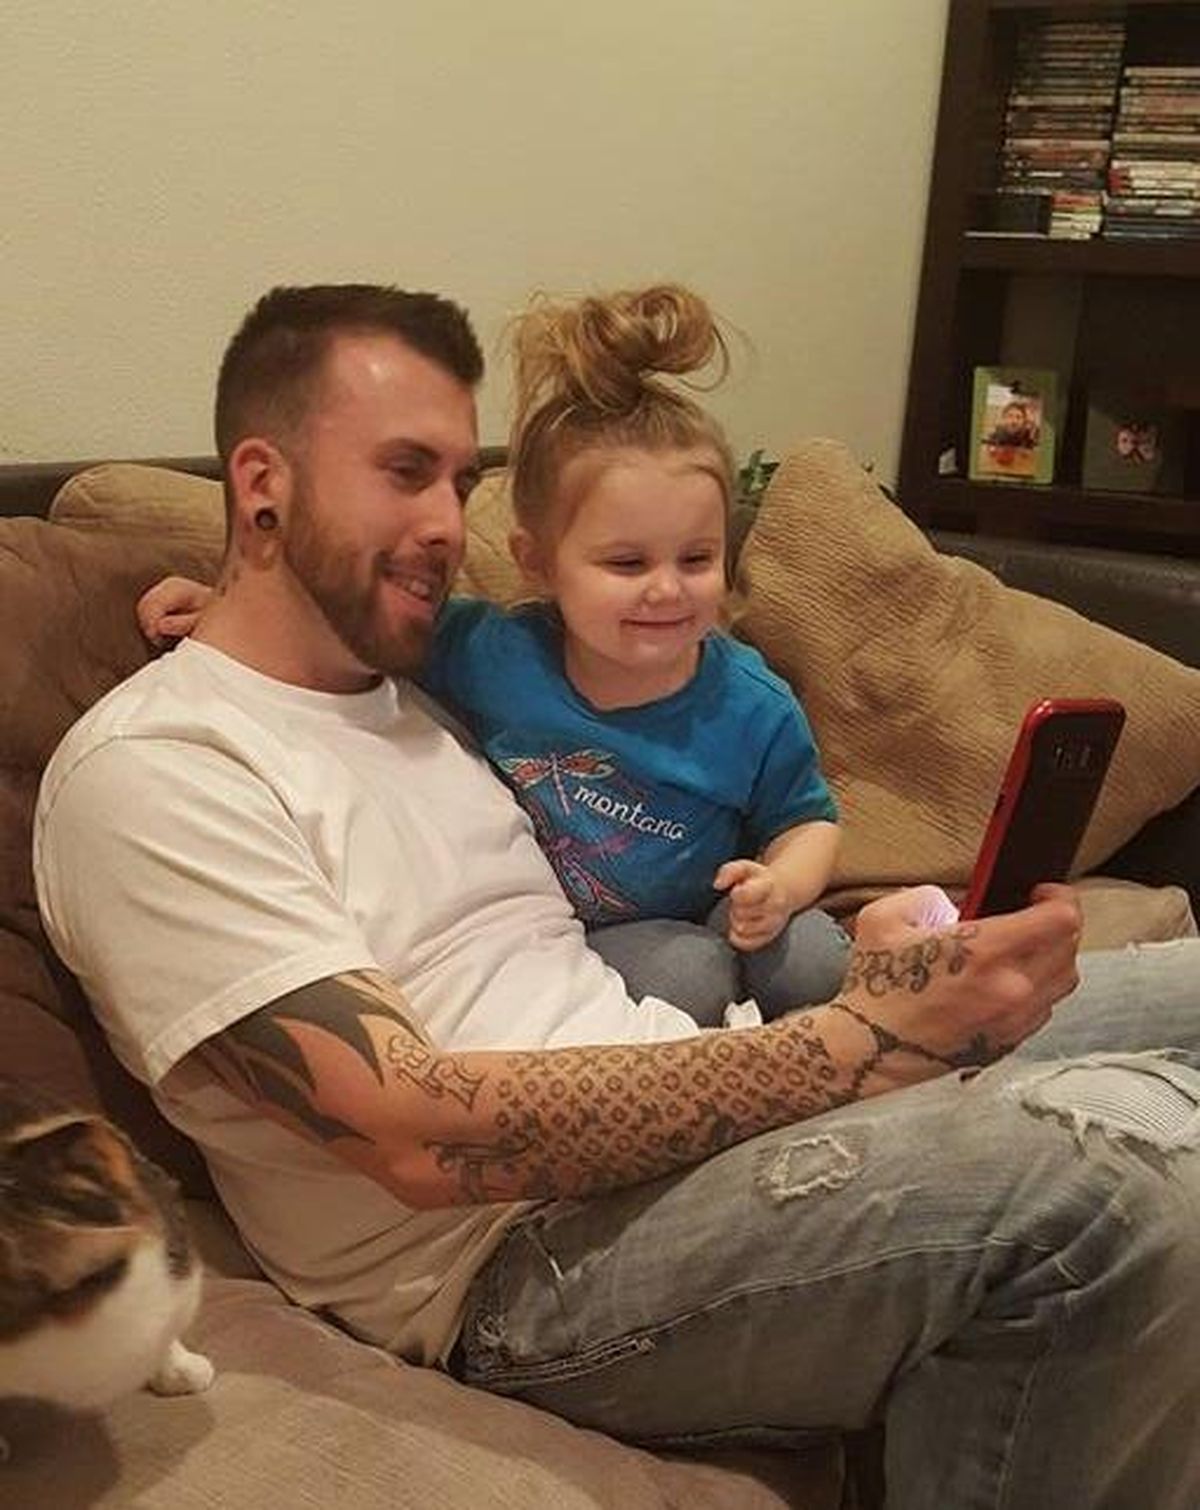 Derek Batton bonds with his fiancee’s daughter in a family photo. Batton, 34, died of an overdose in the Grant County Jail in Ephrata, Washington, on Sunday, Aug. 12, 2018. (Courtesy of Tiffany Hagadorn)